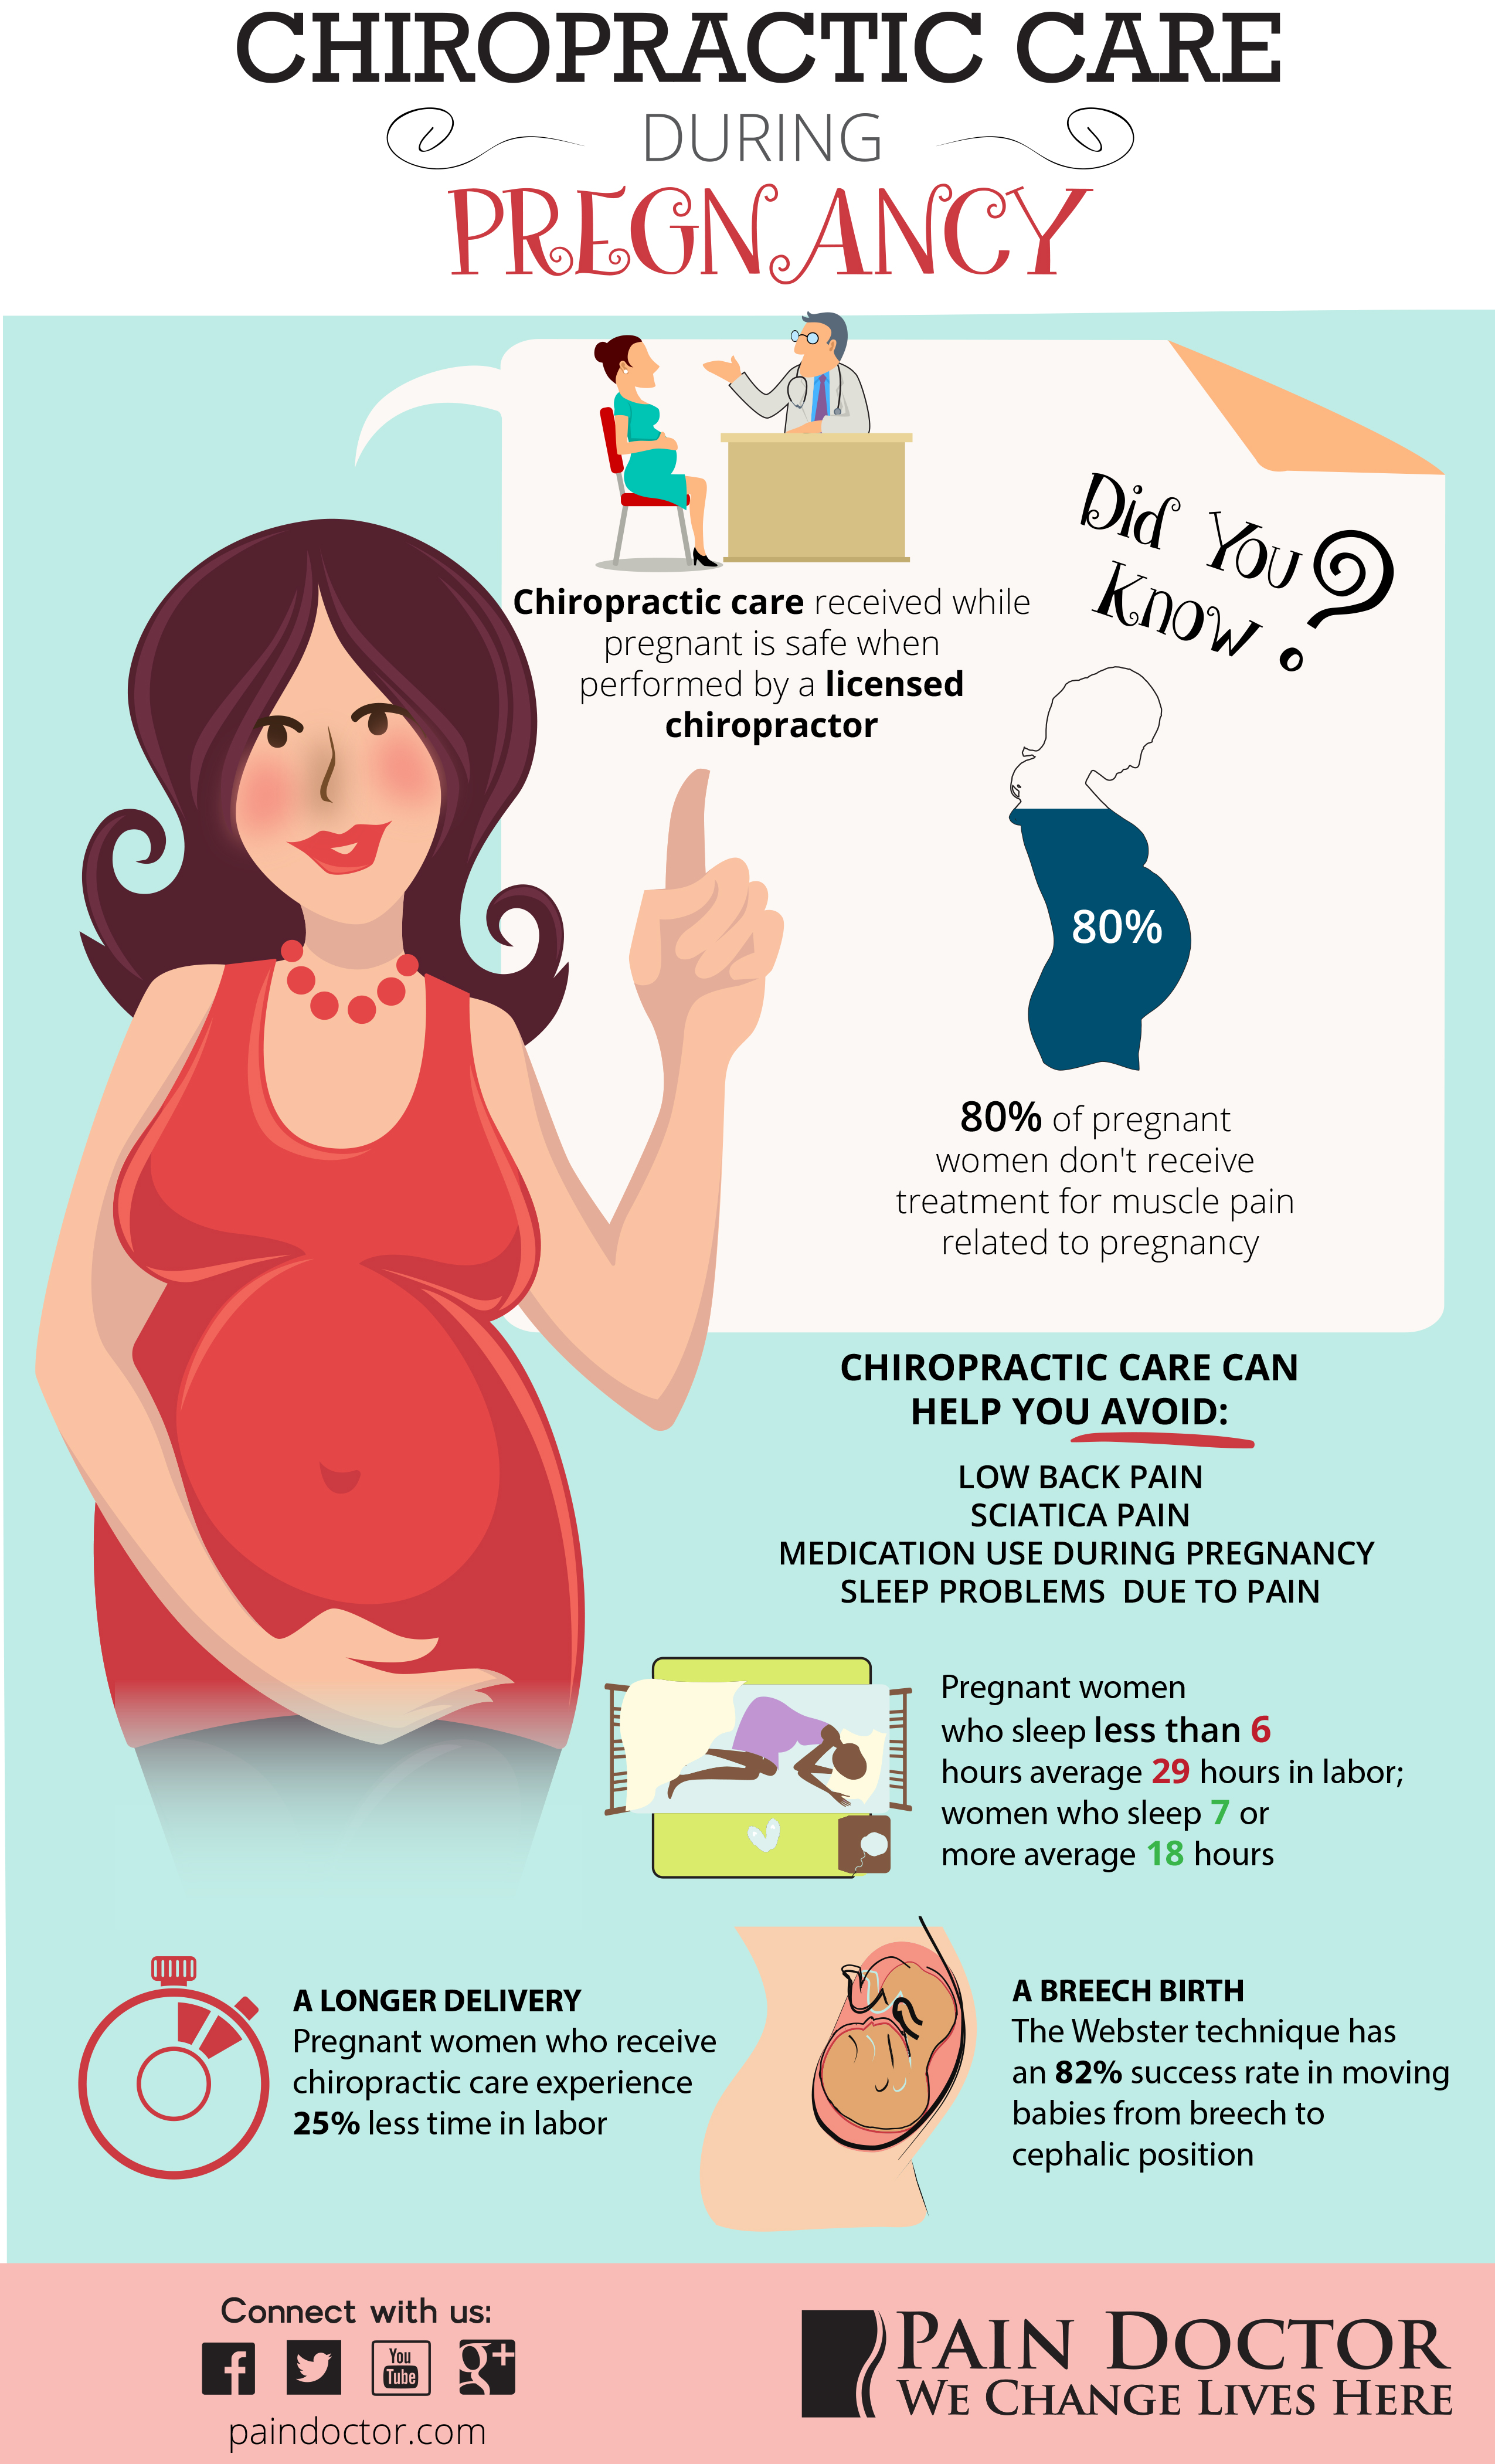 Chiropractic Care During Pregnancy | Visual.ly